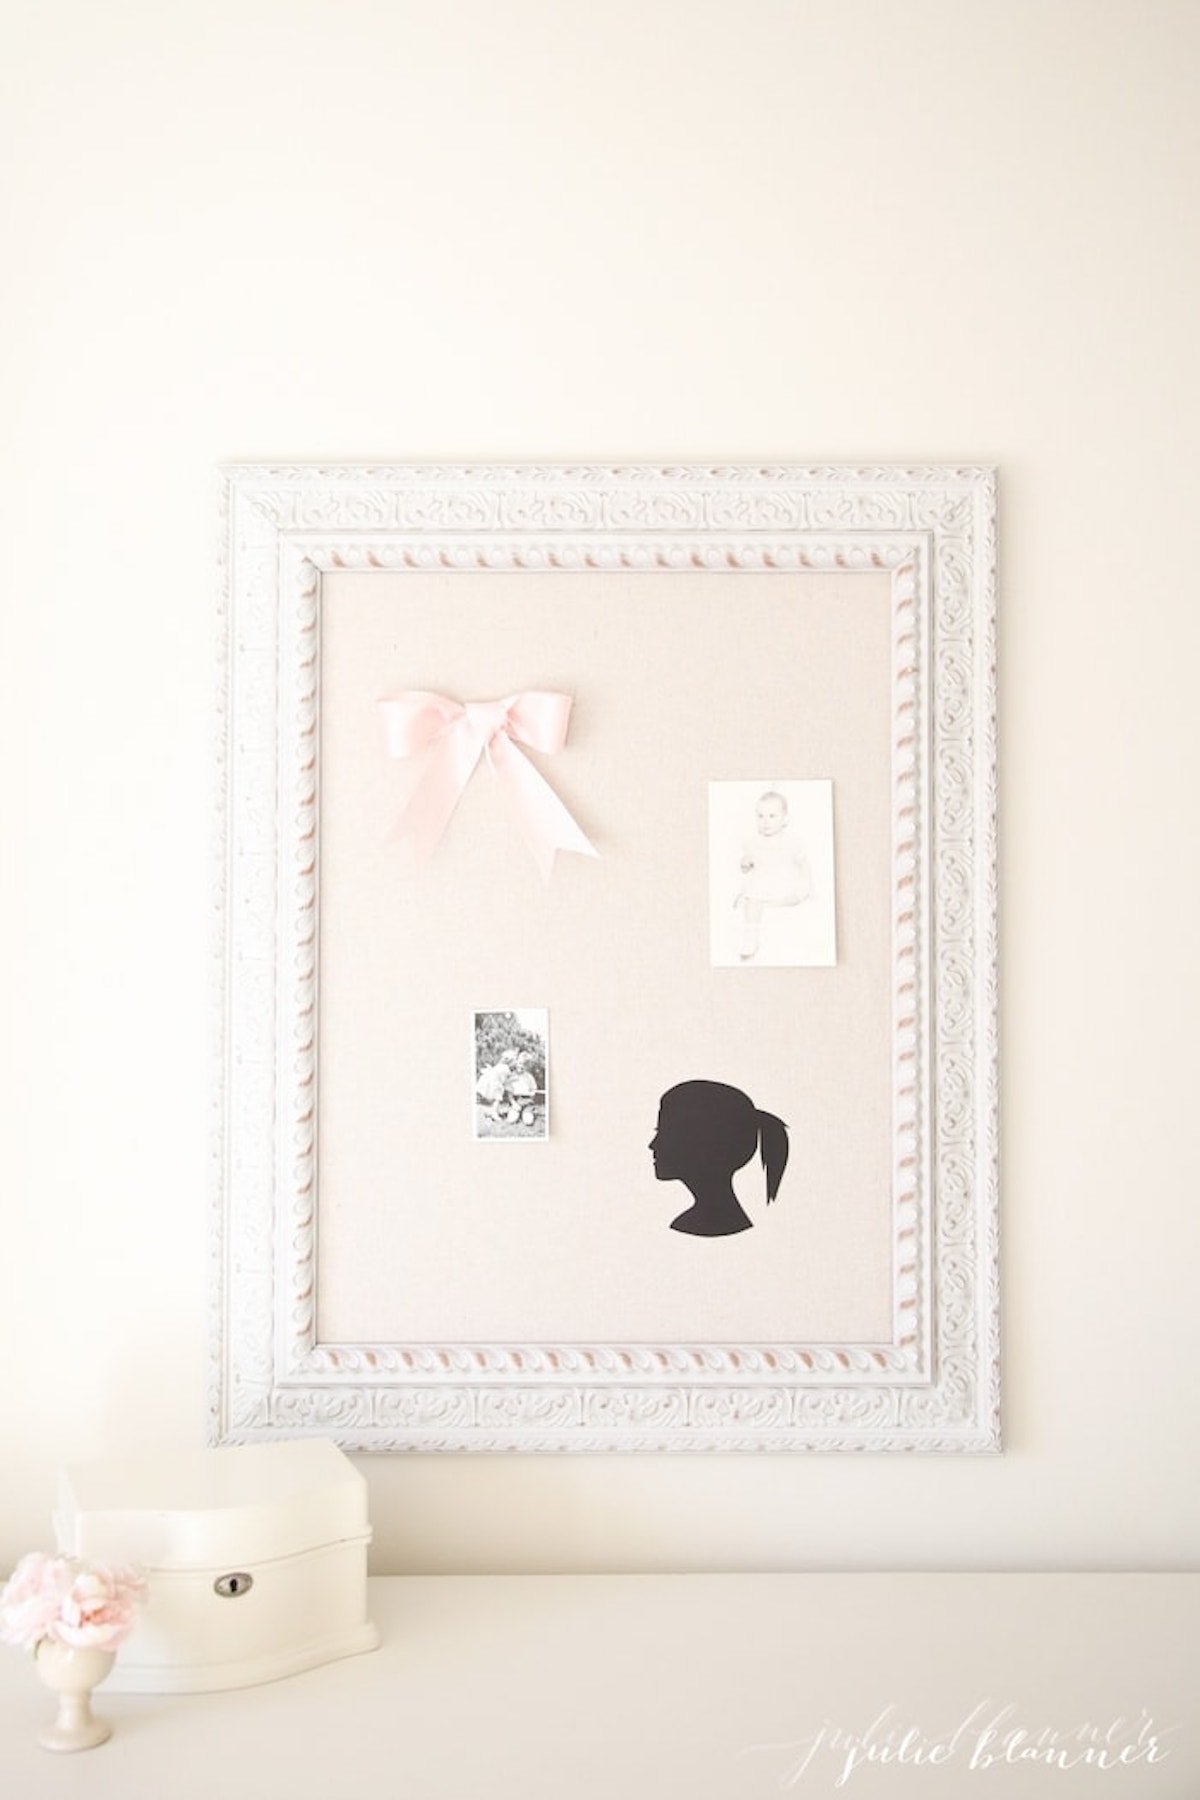 An enchanting DIY wall decor featuring a picture of a girl within a white frame.